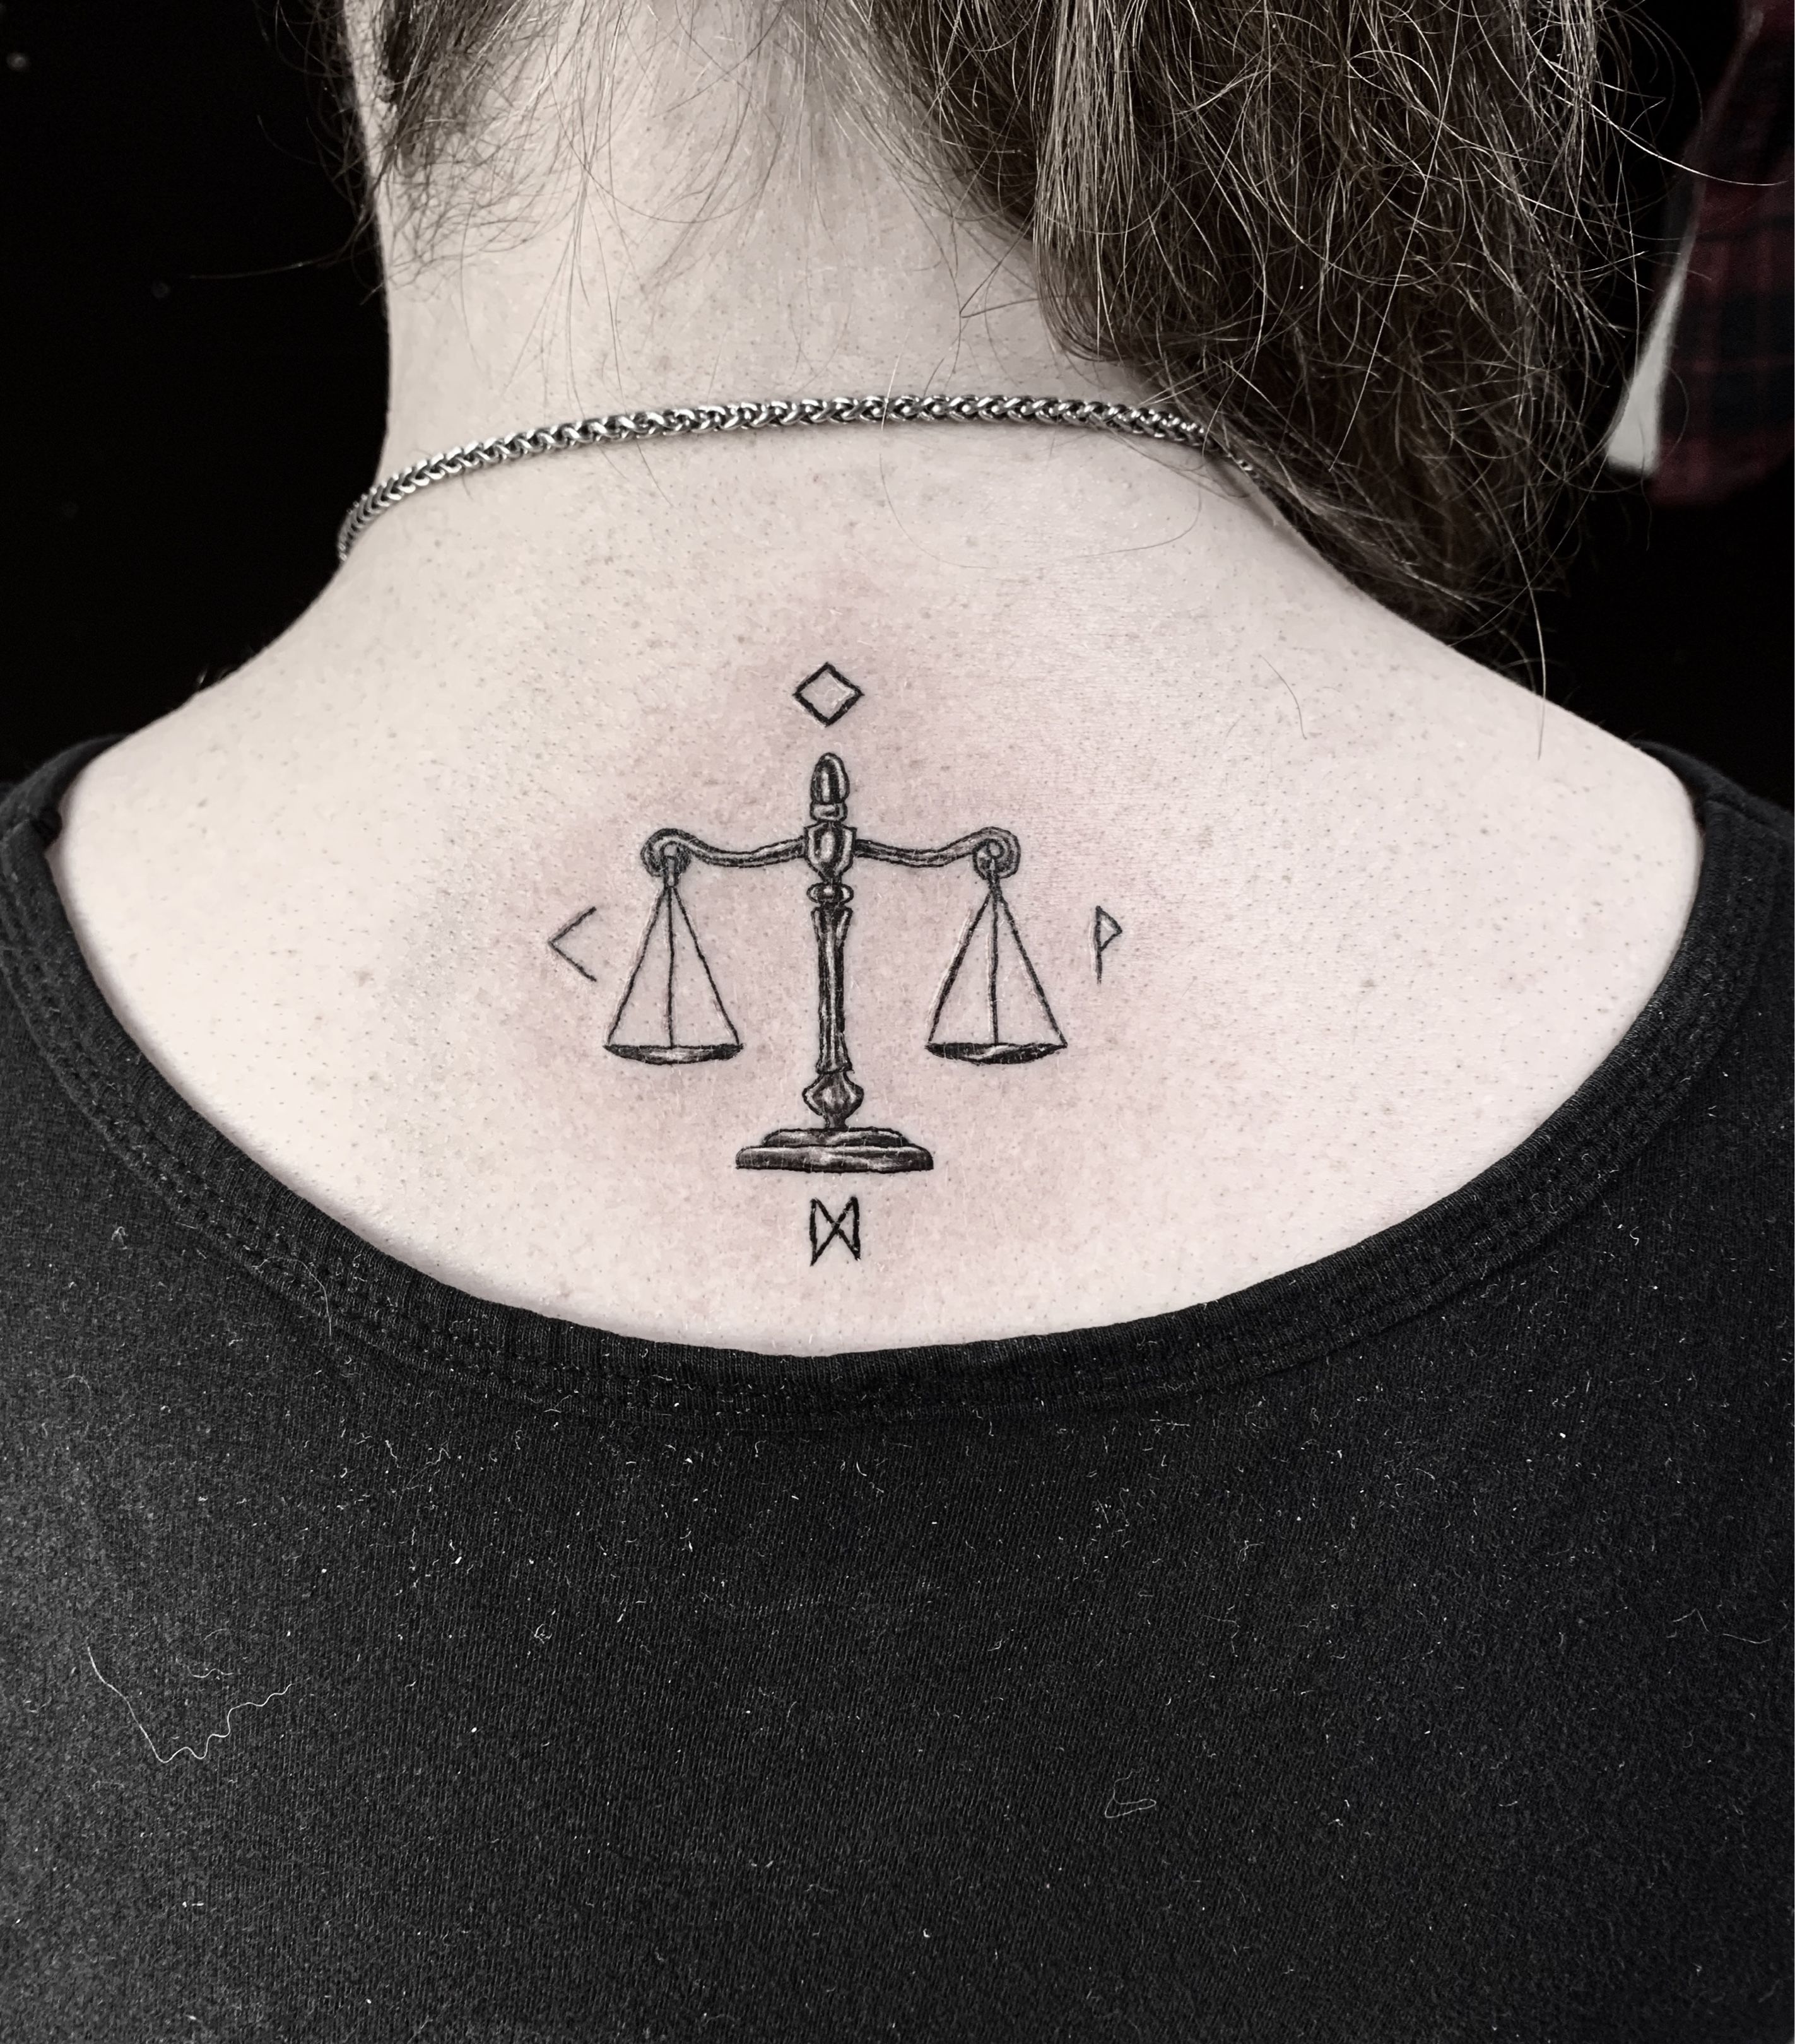 Stoic Temporary Tattoo, the Scales of Justice Tattoo, Black Tattoo, Black  Tattoo, Meaningful Tattoo, Symbol Tattoo, Philosophy Tattoos - Etsy